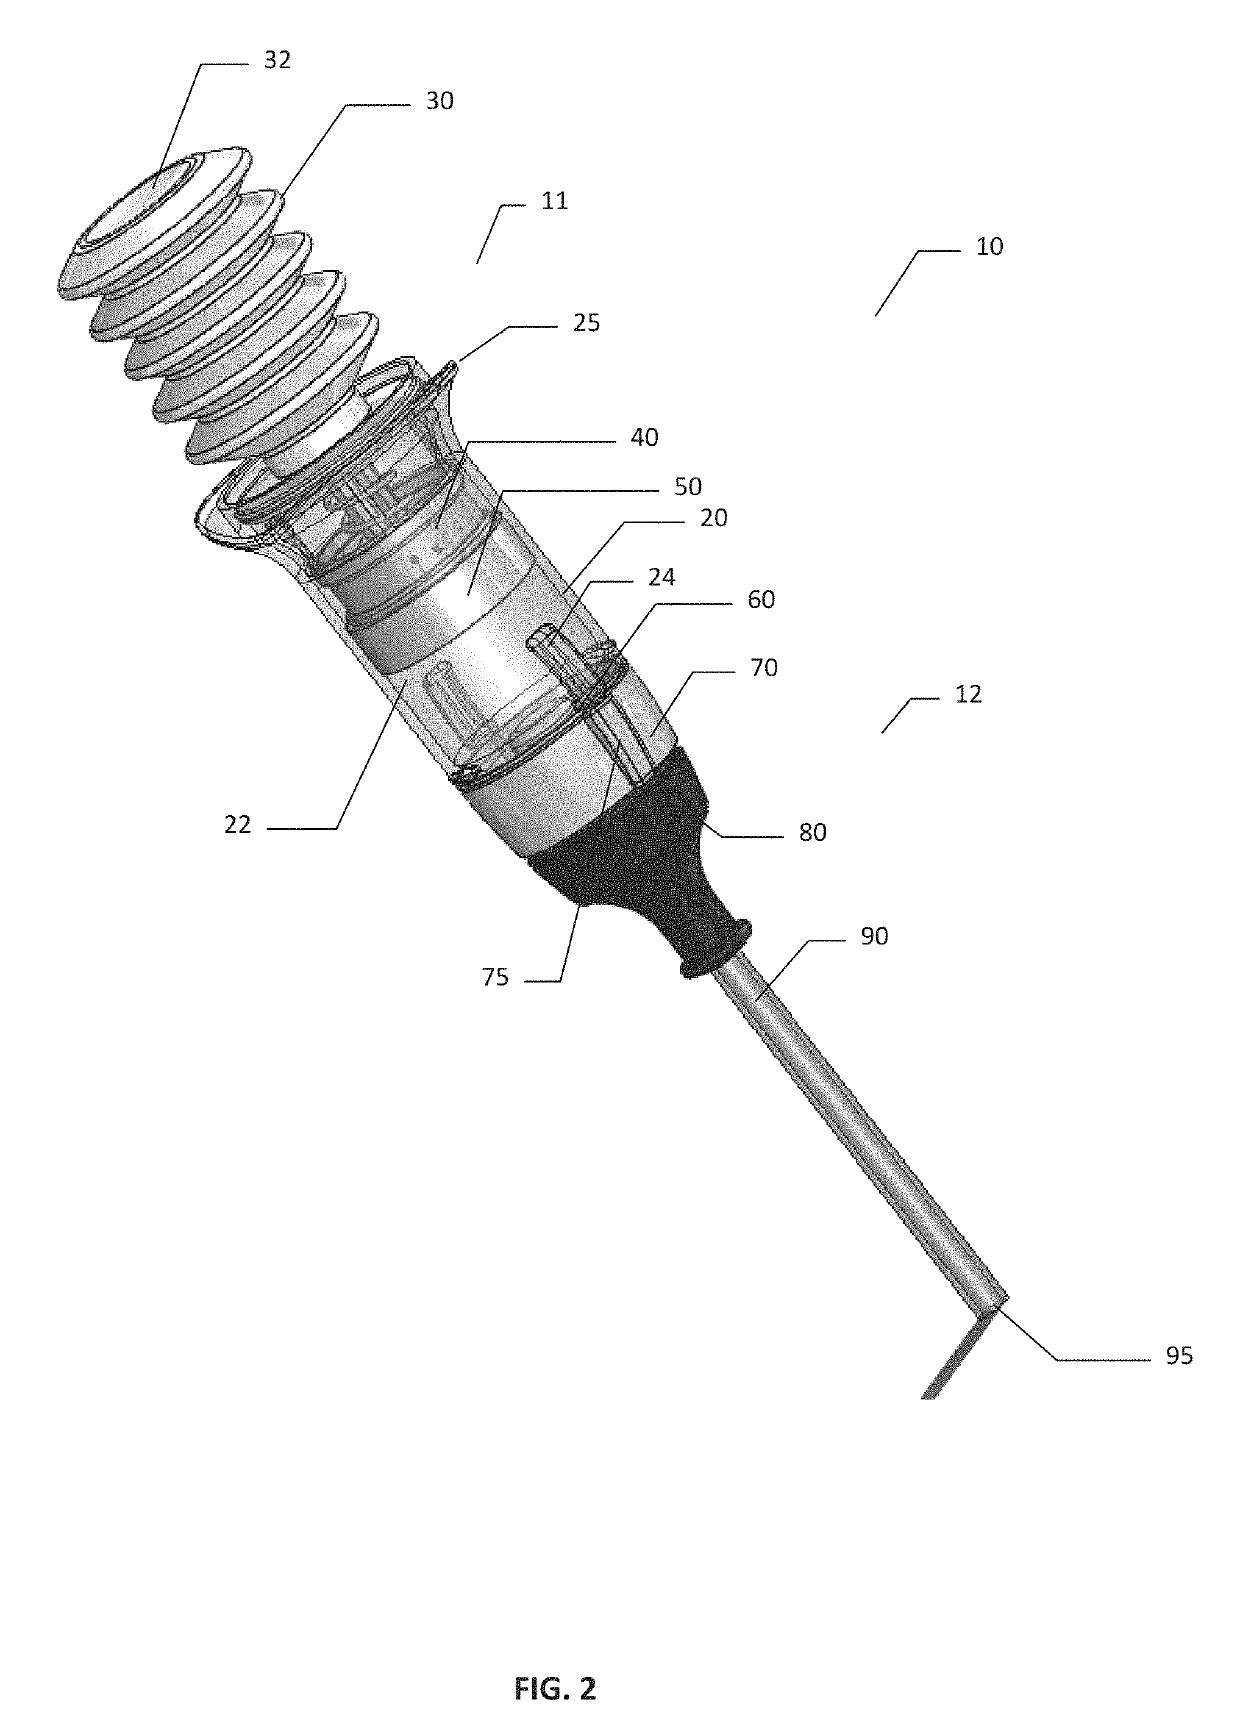 Hemostatic powder delivery devices and methods